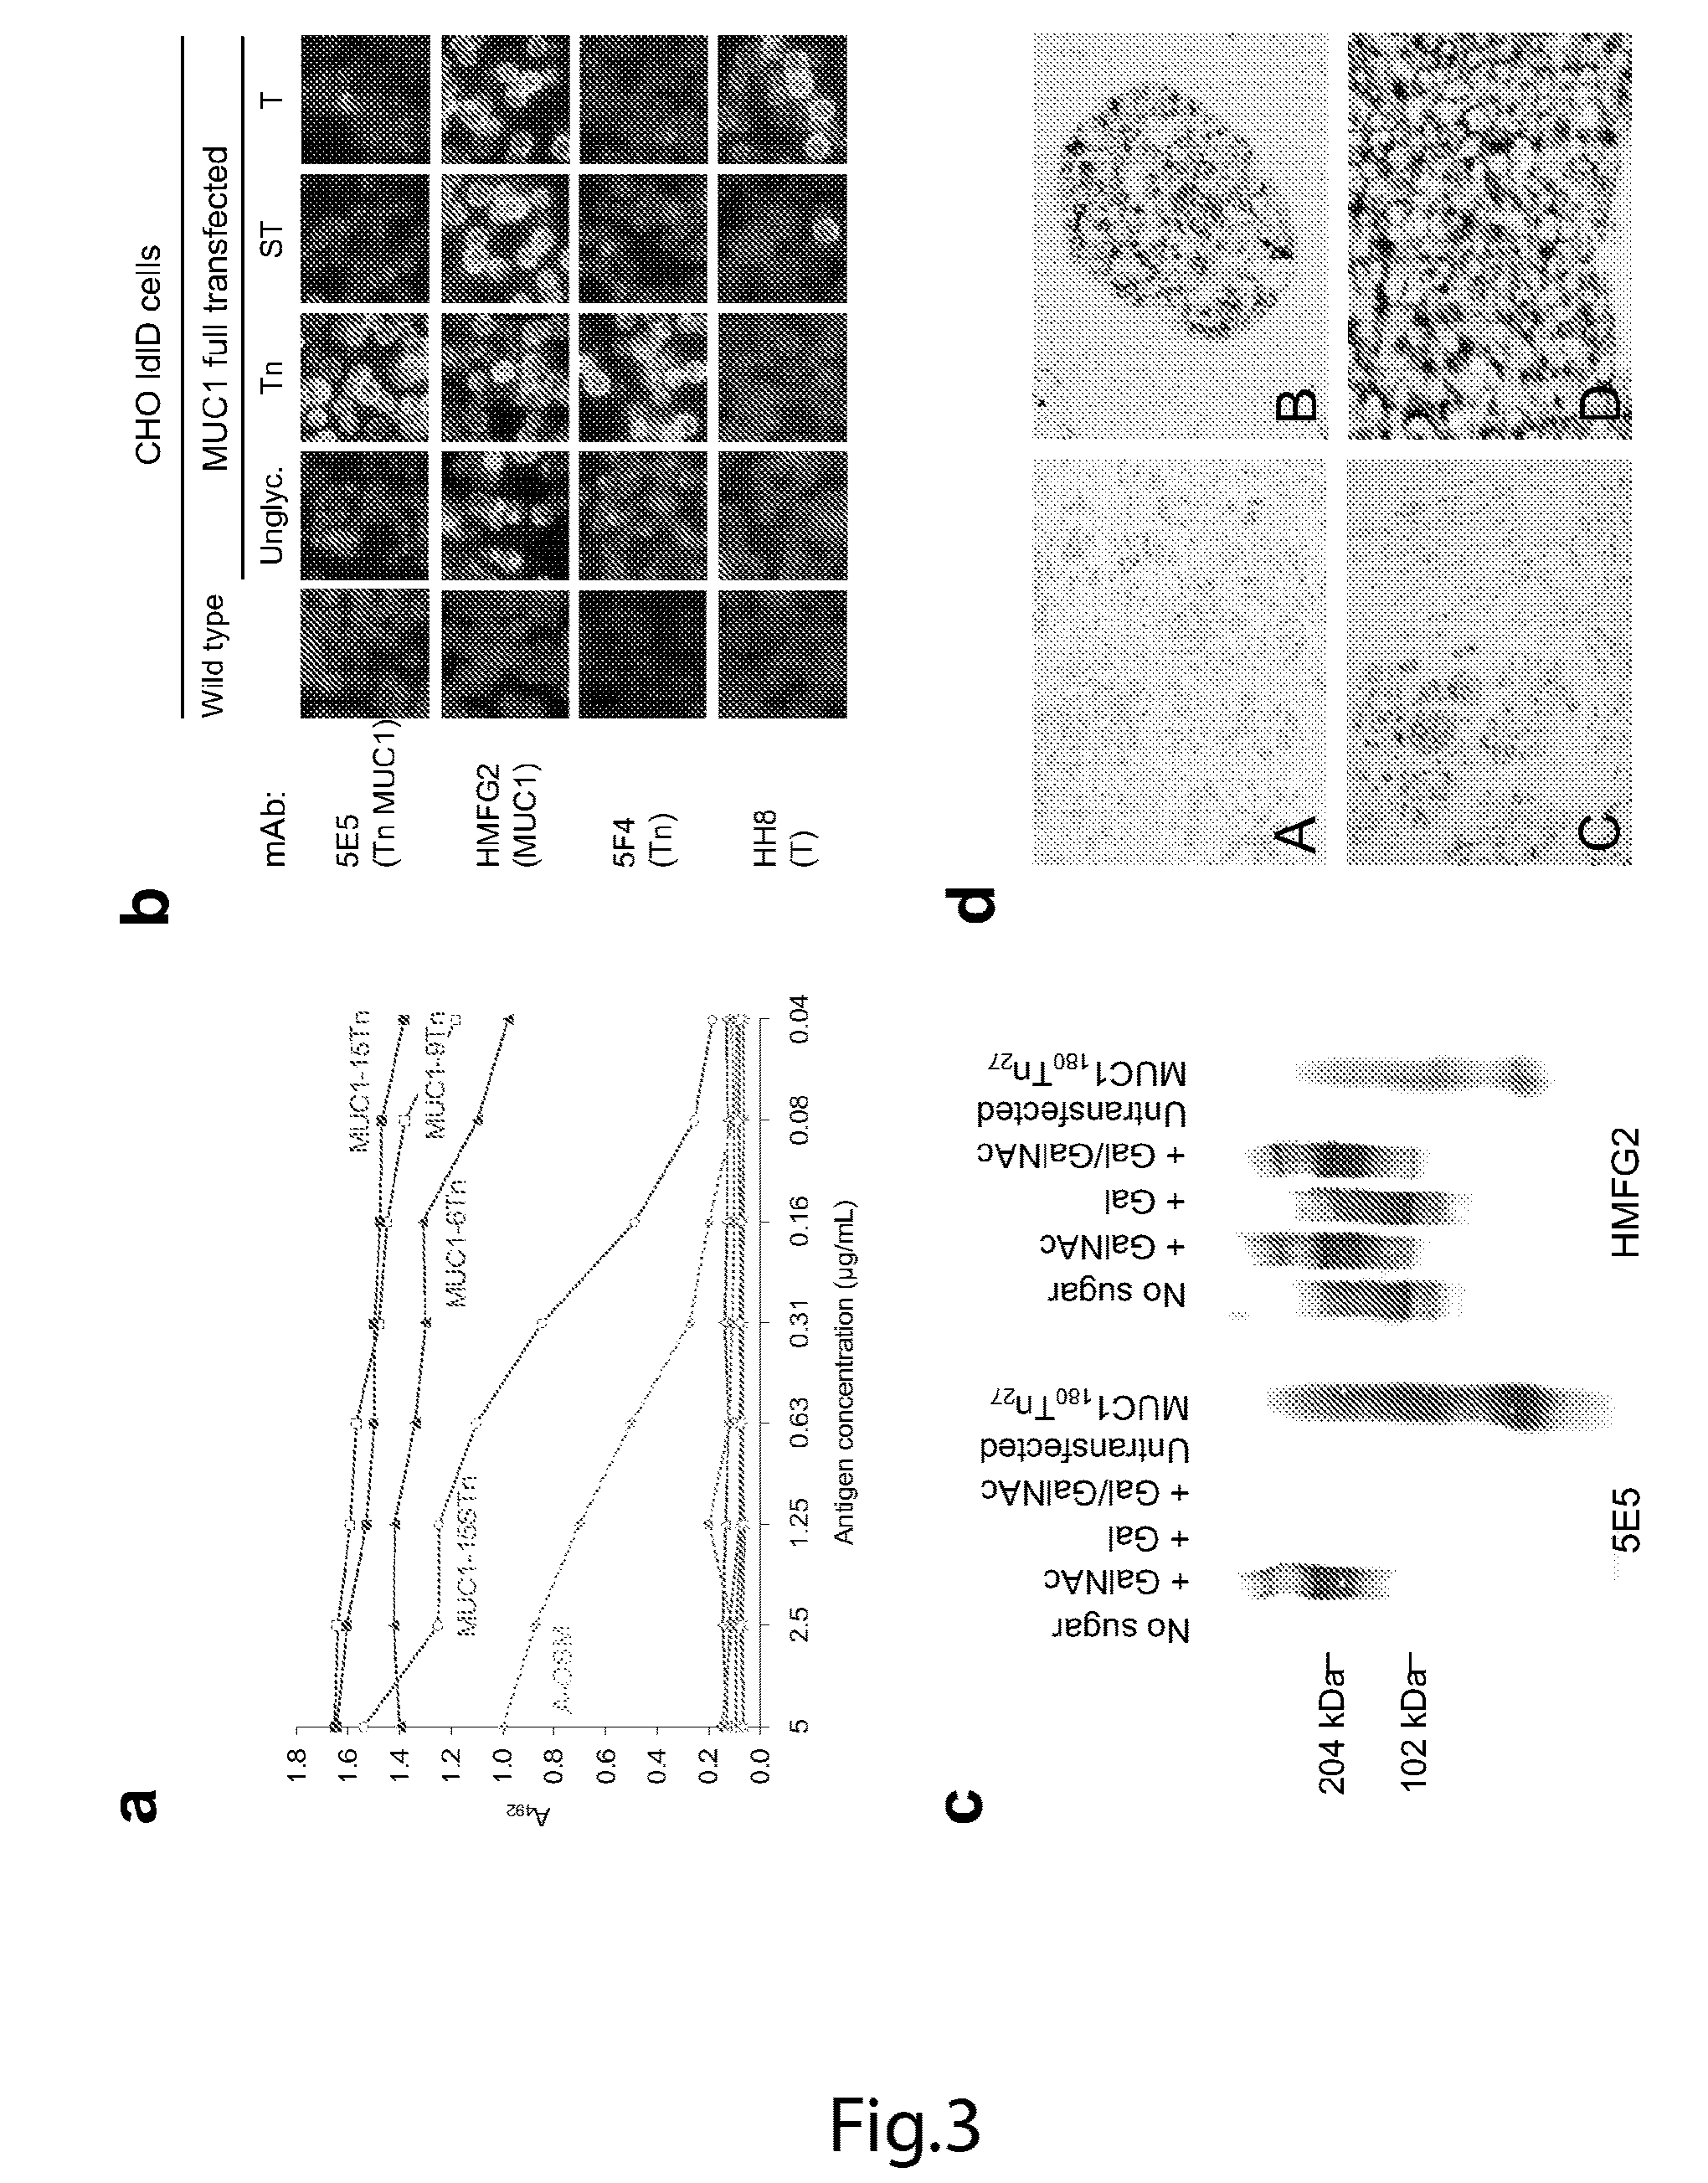 Generation of a cancer-specific immune response toward MUC1 and cancer specific MUC1 antibodies